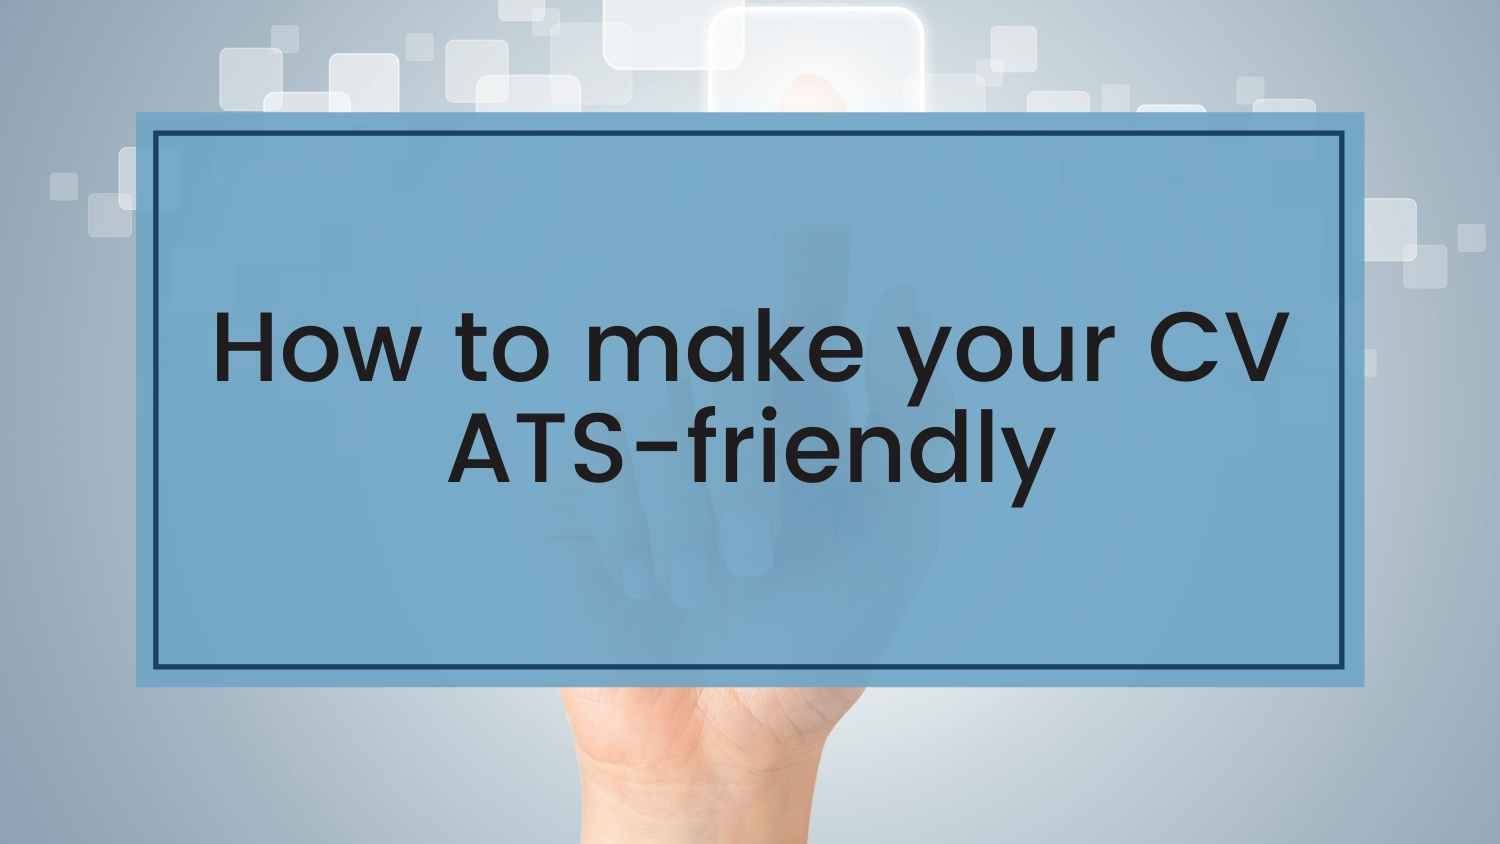 How to make your CV ATS-friendly